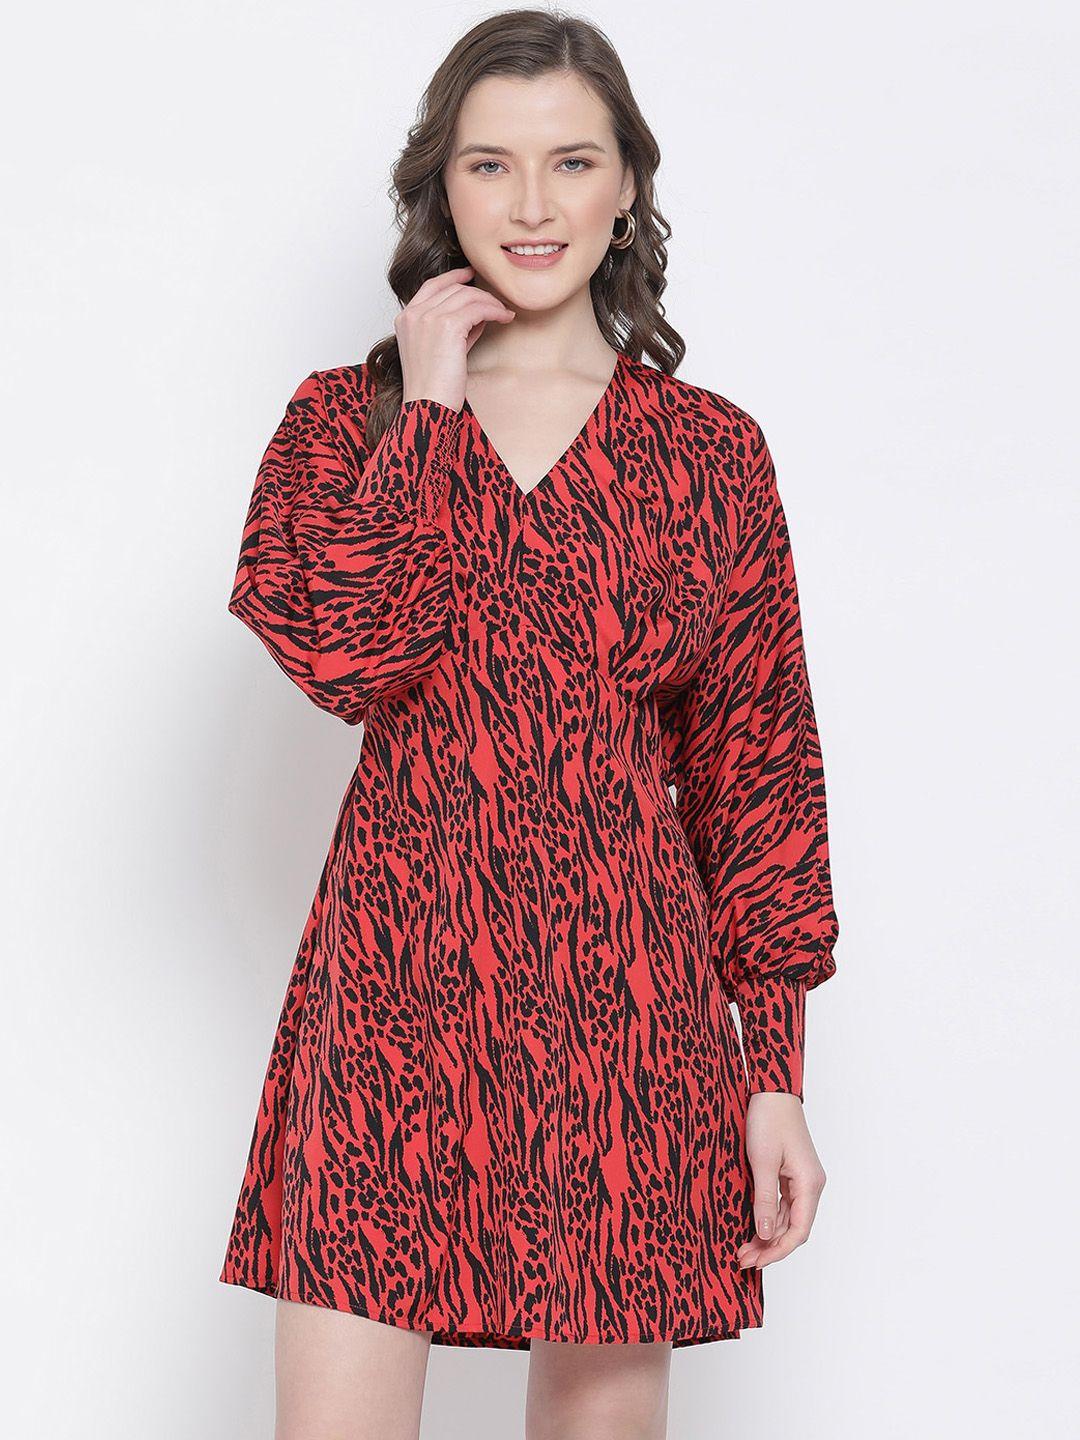 oxolloxo women red & black animal printed fit & flare dress